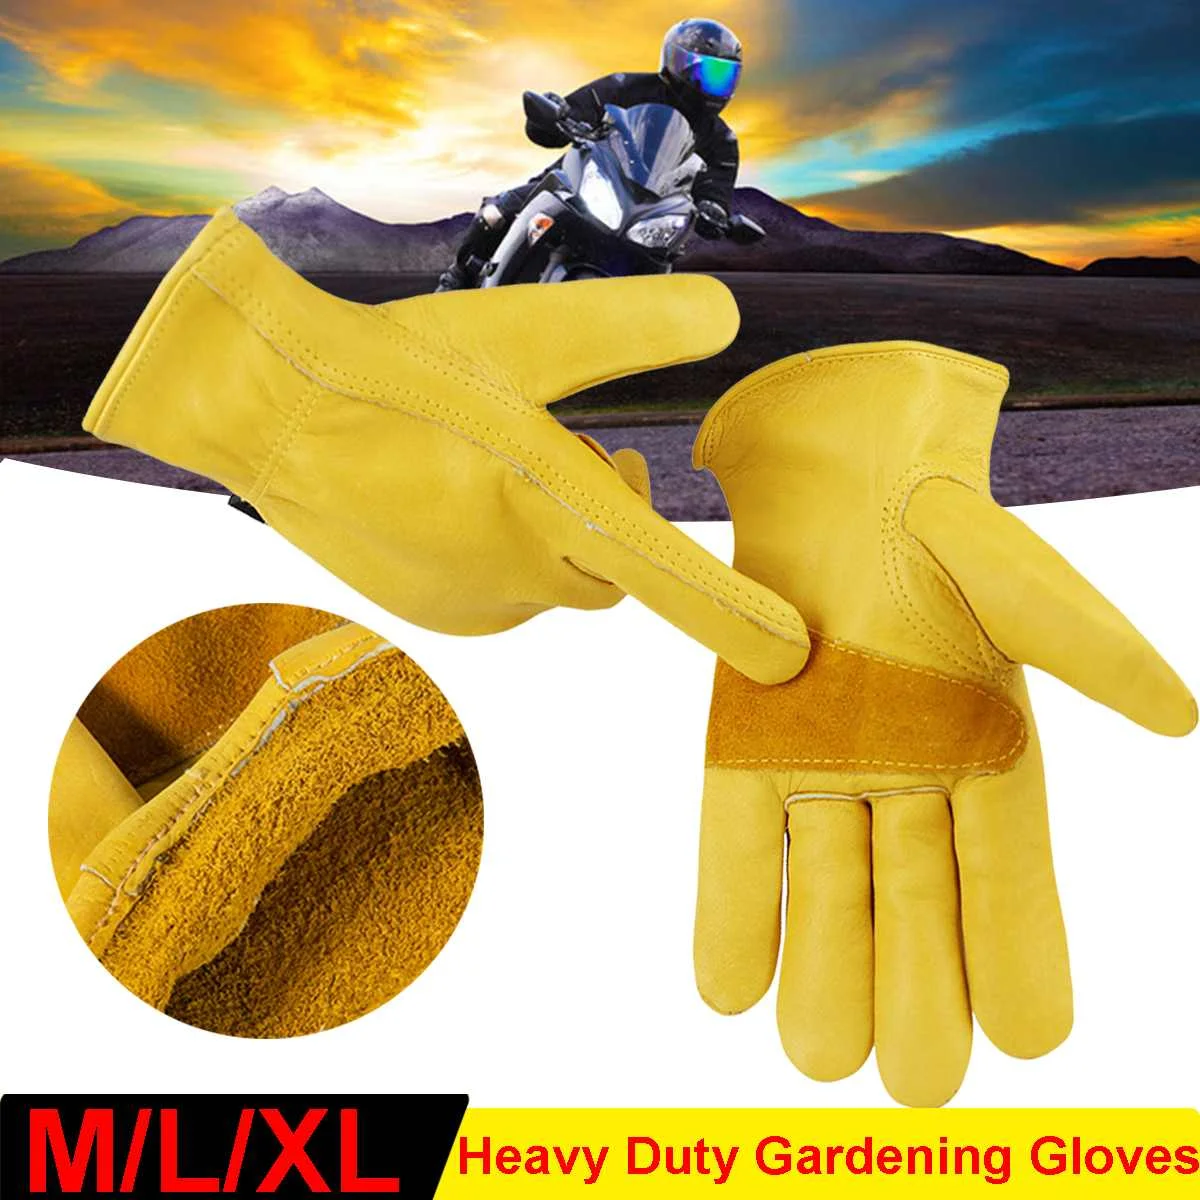 

Heavy Duty Gardening Gloves Non-slip Breathable Cowhide Leather Blending Household Glove Thorn Proof Work Gloves Outdoor Gadgets